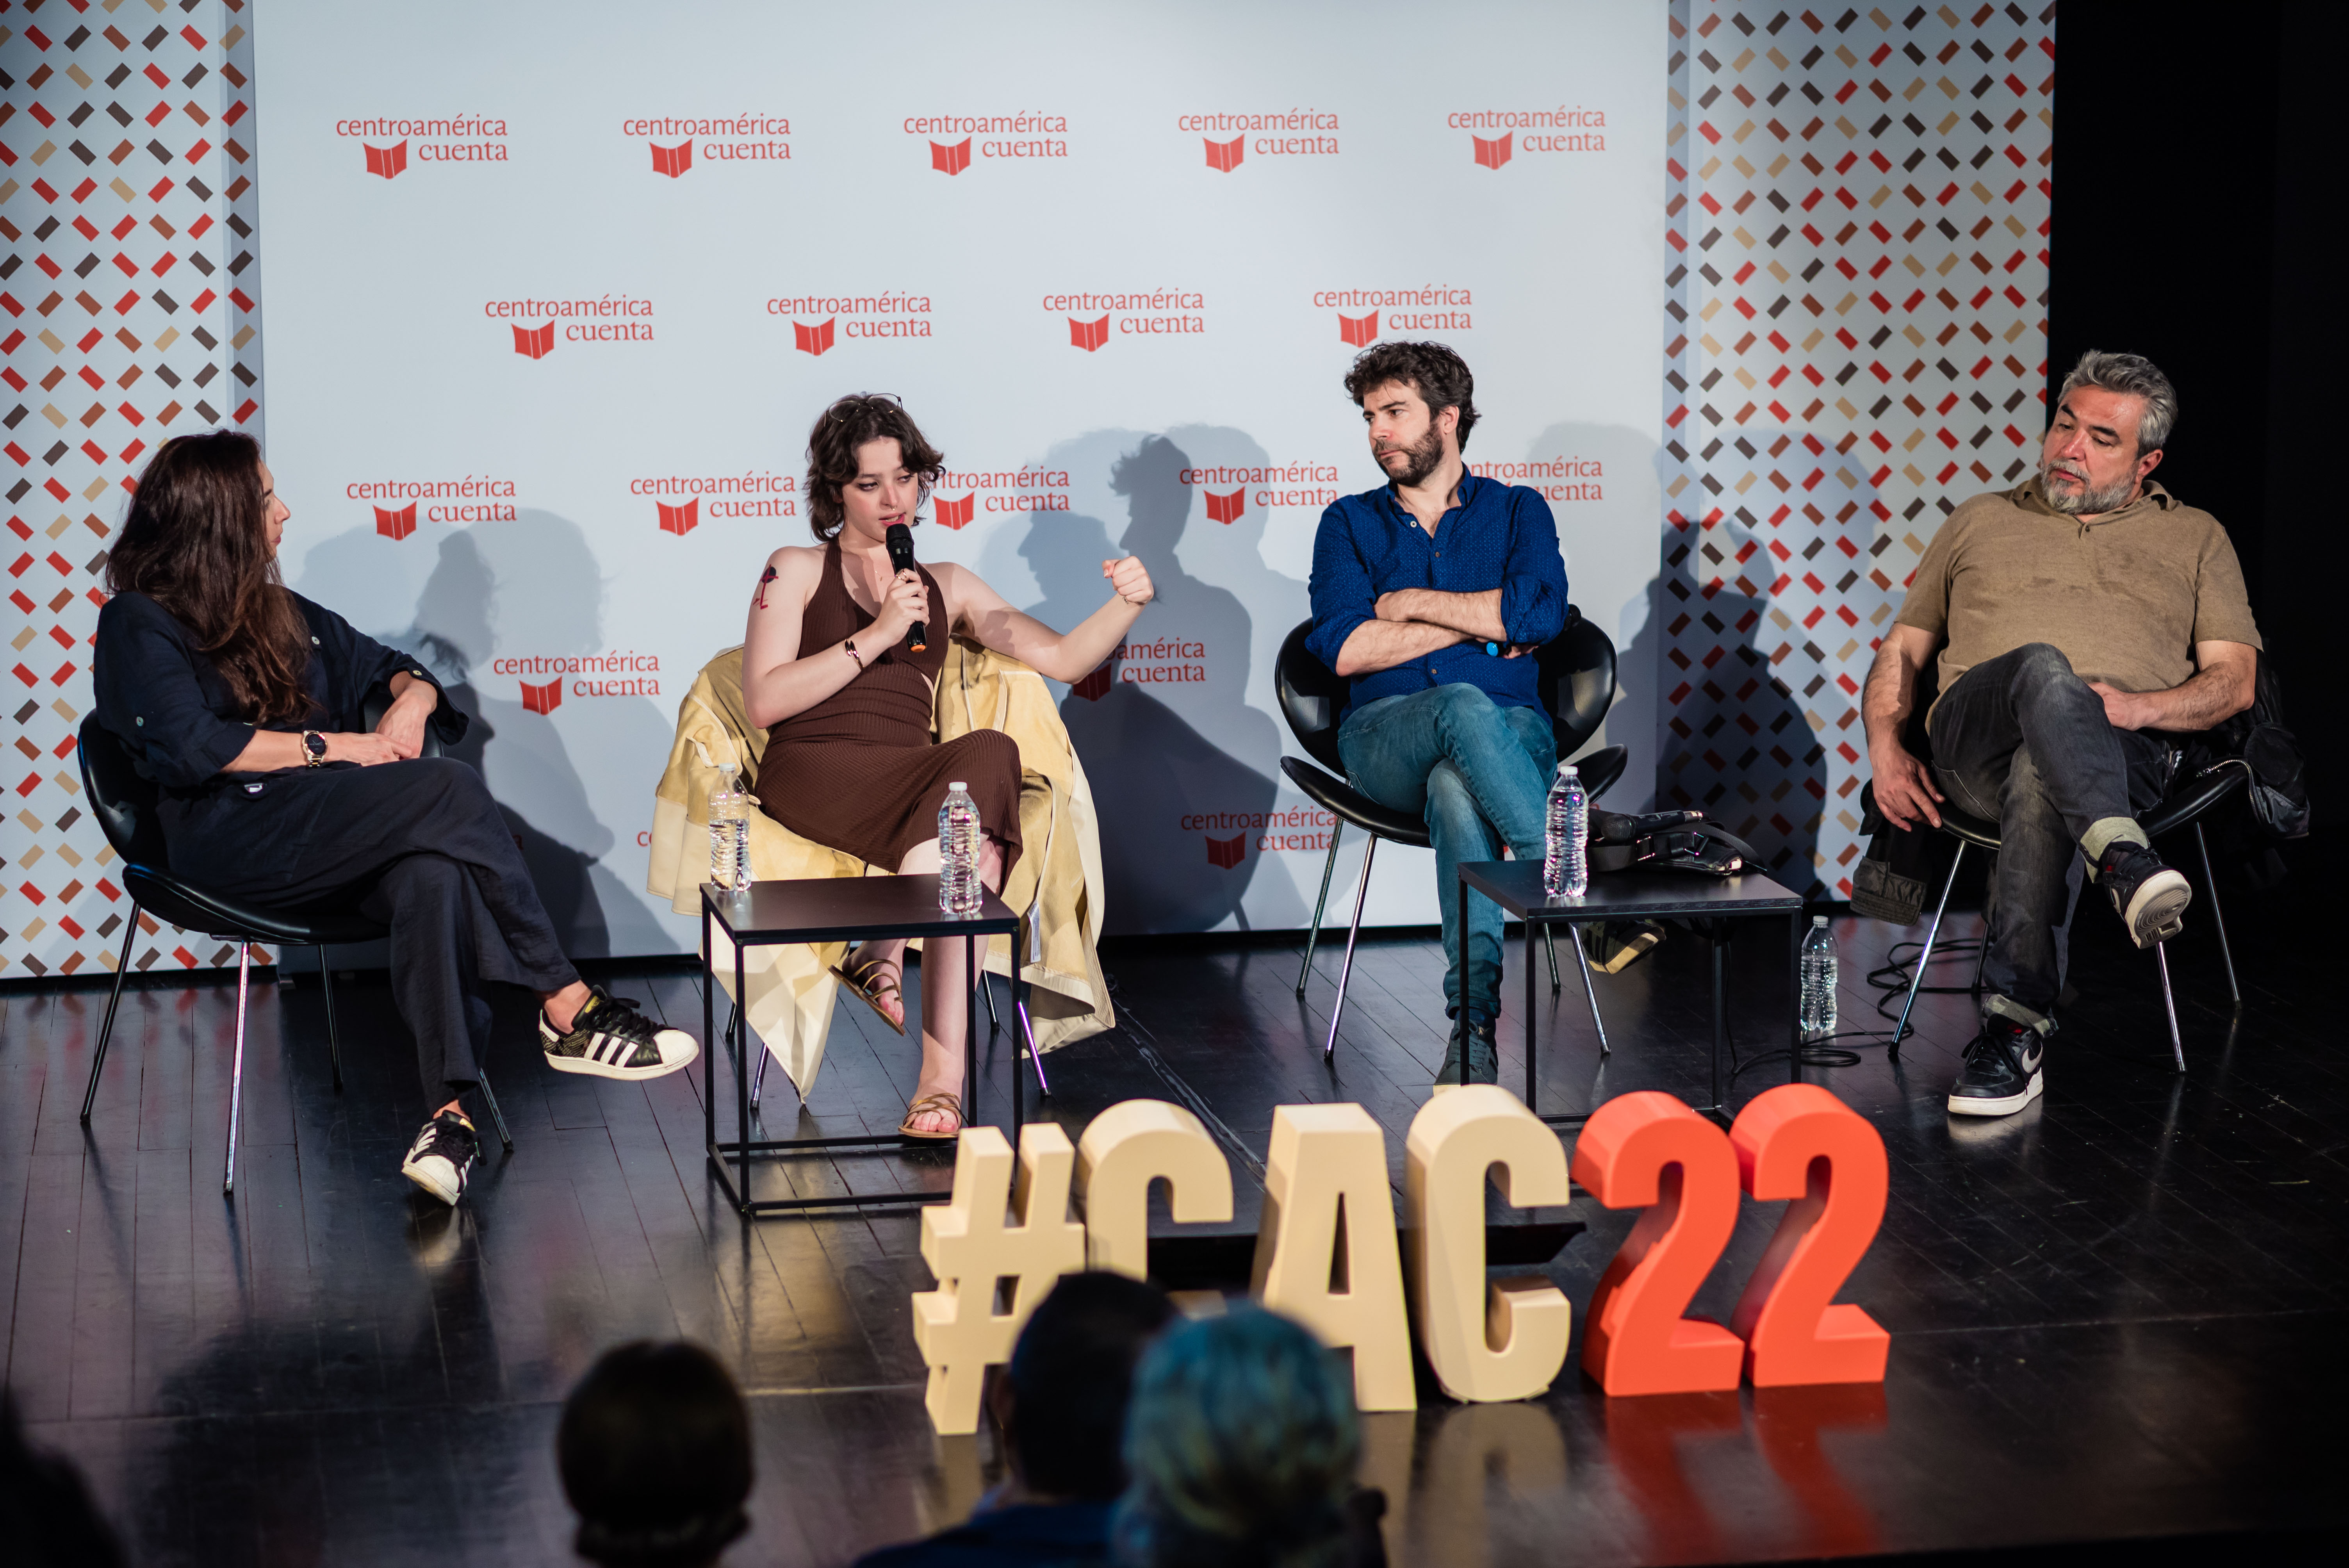 The Centroamérica Cuenta festival, held this year in Guatemala due to the repressive situation in Nicaragua, had top-class guests such as Spanish sensation Elizabeth Duval (second from left).